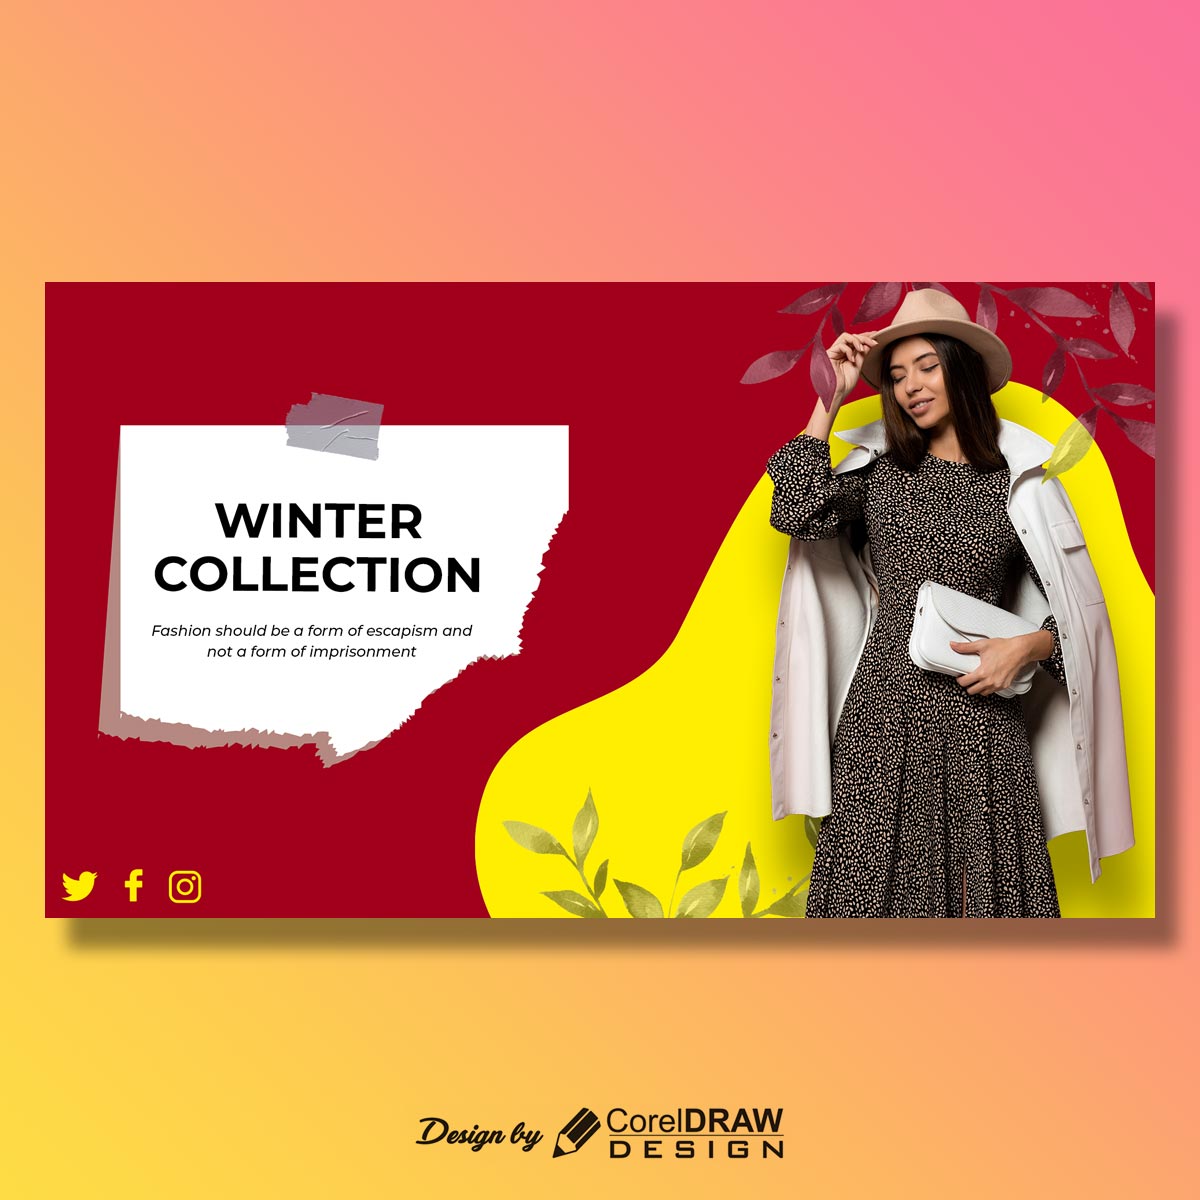 Red and Yellow Winter collection fashion banner download PSD file 2021 trending